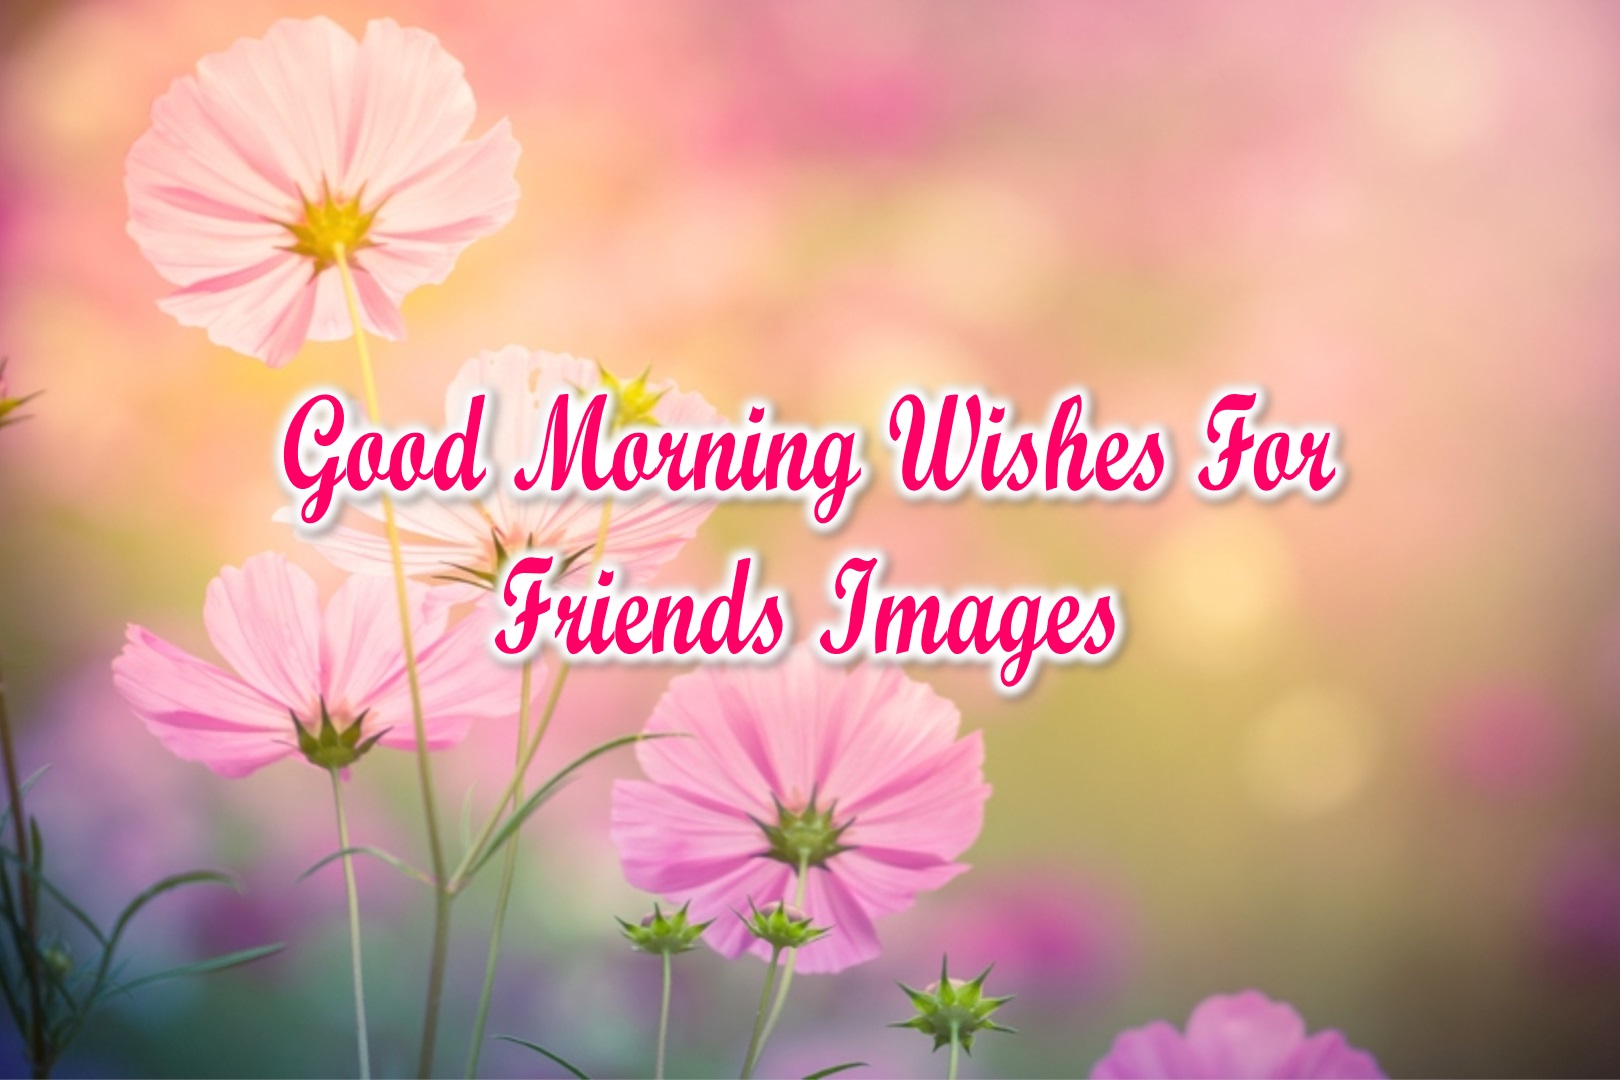 Good Morning Wishes For Friends Images